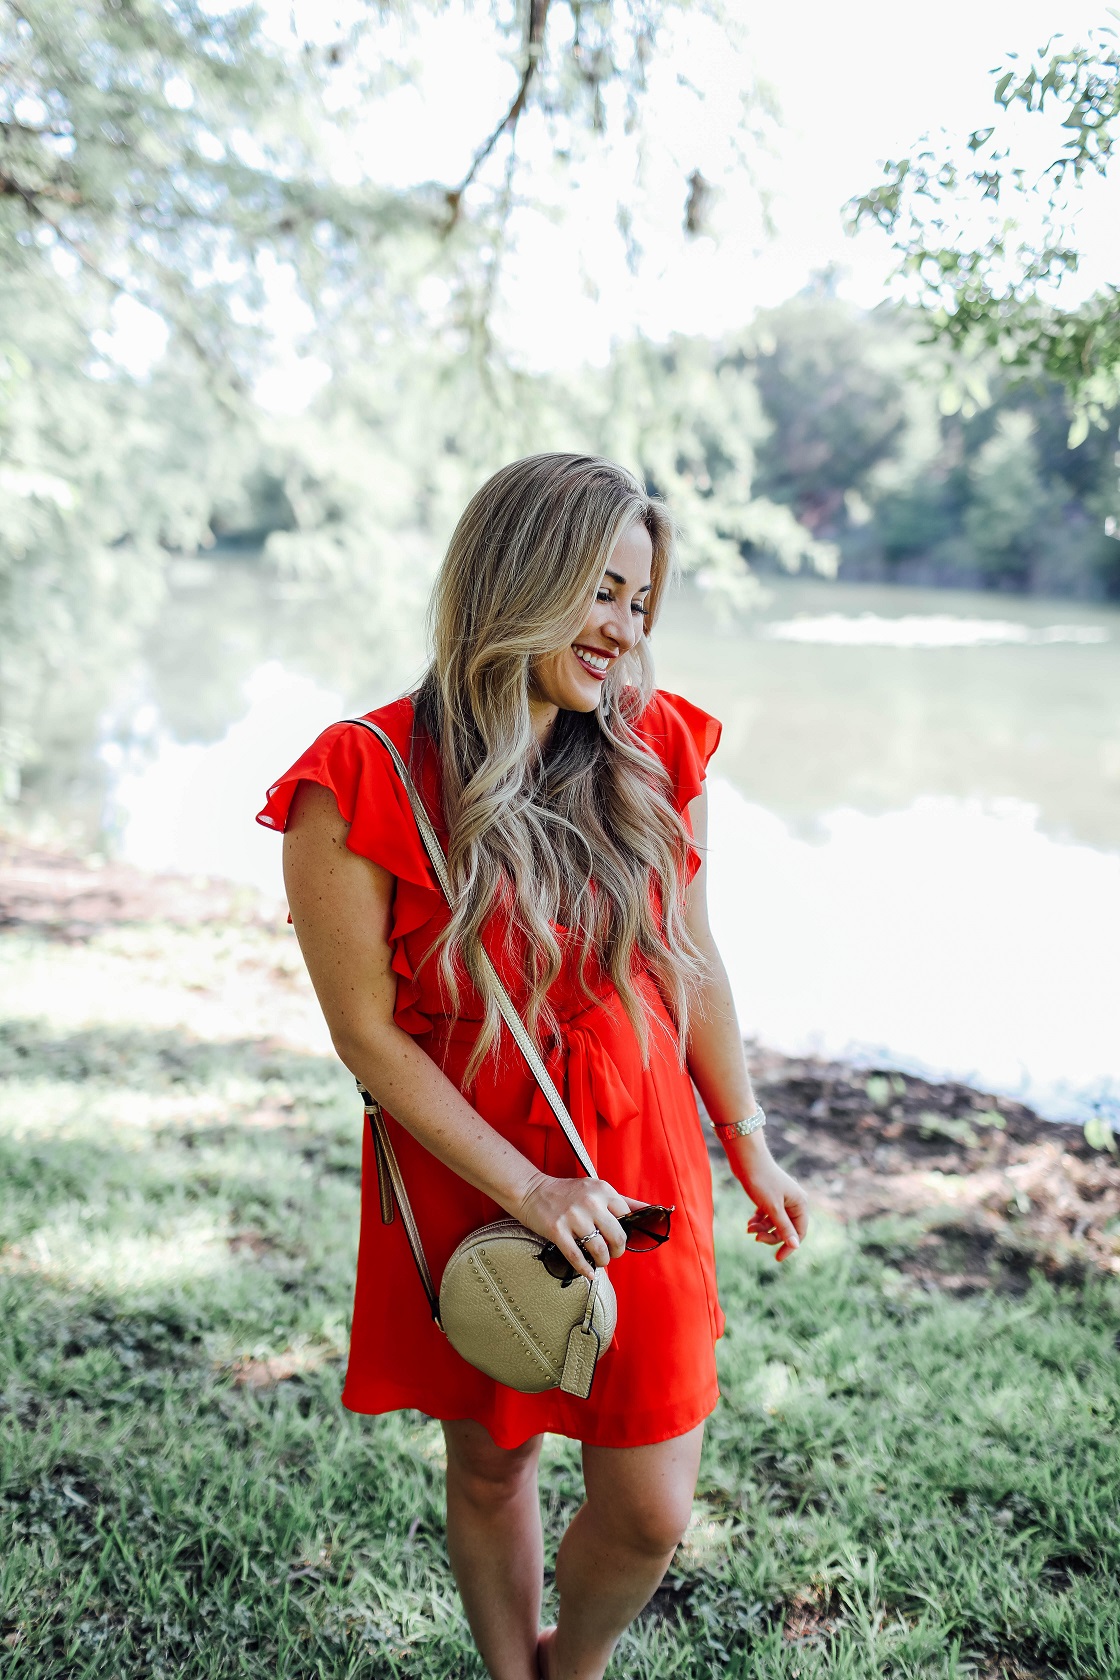 Cute summer dresses featured by popular fashion blogger, Walking in Memphis in High Heels: Socialite red ruffle sleeve dress